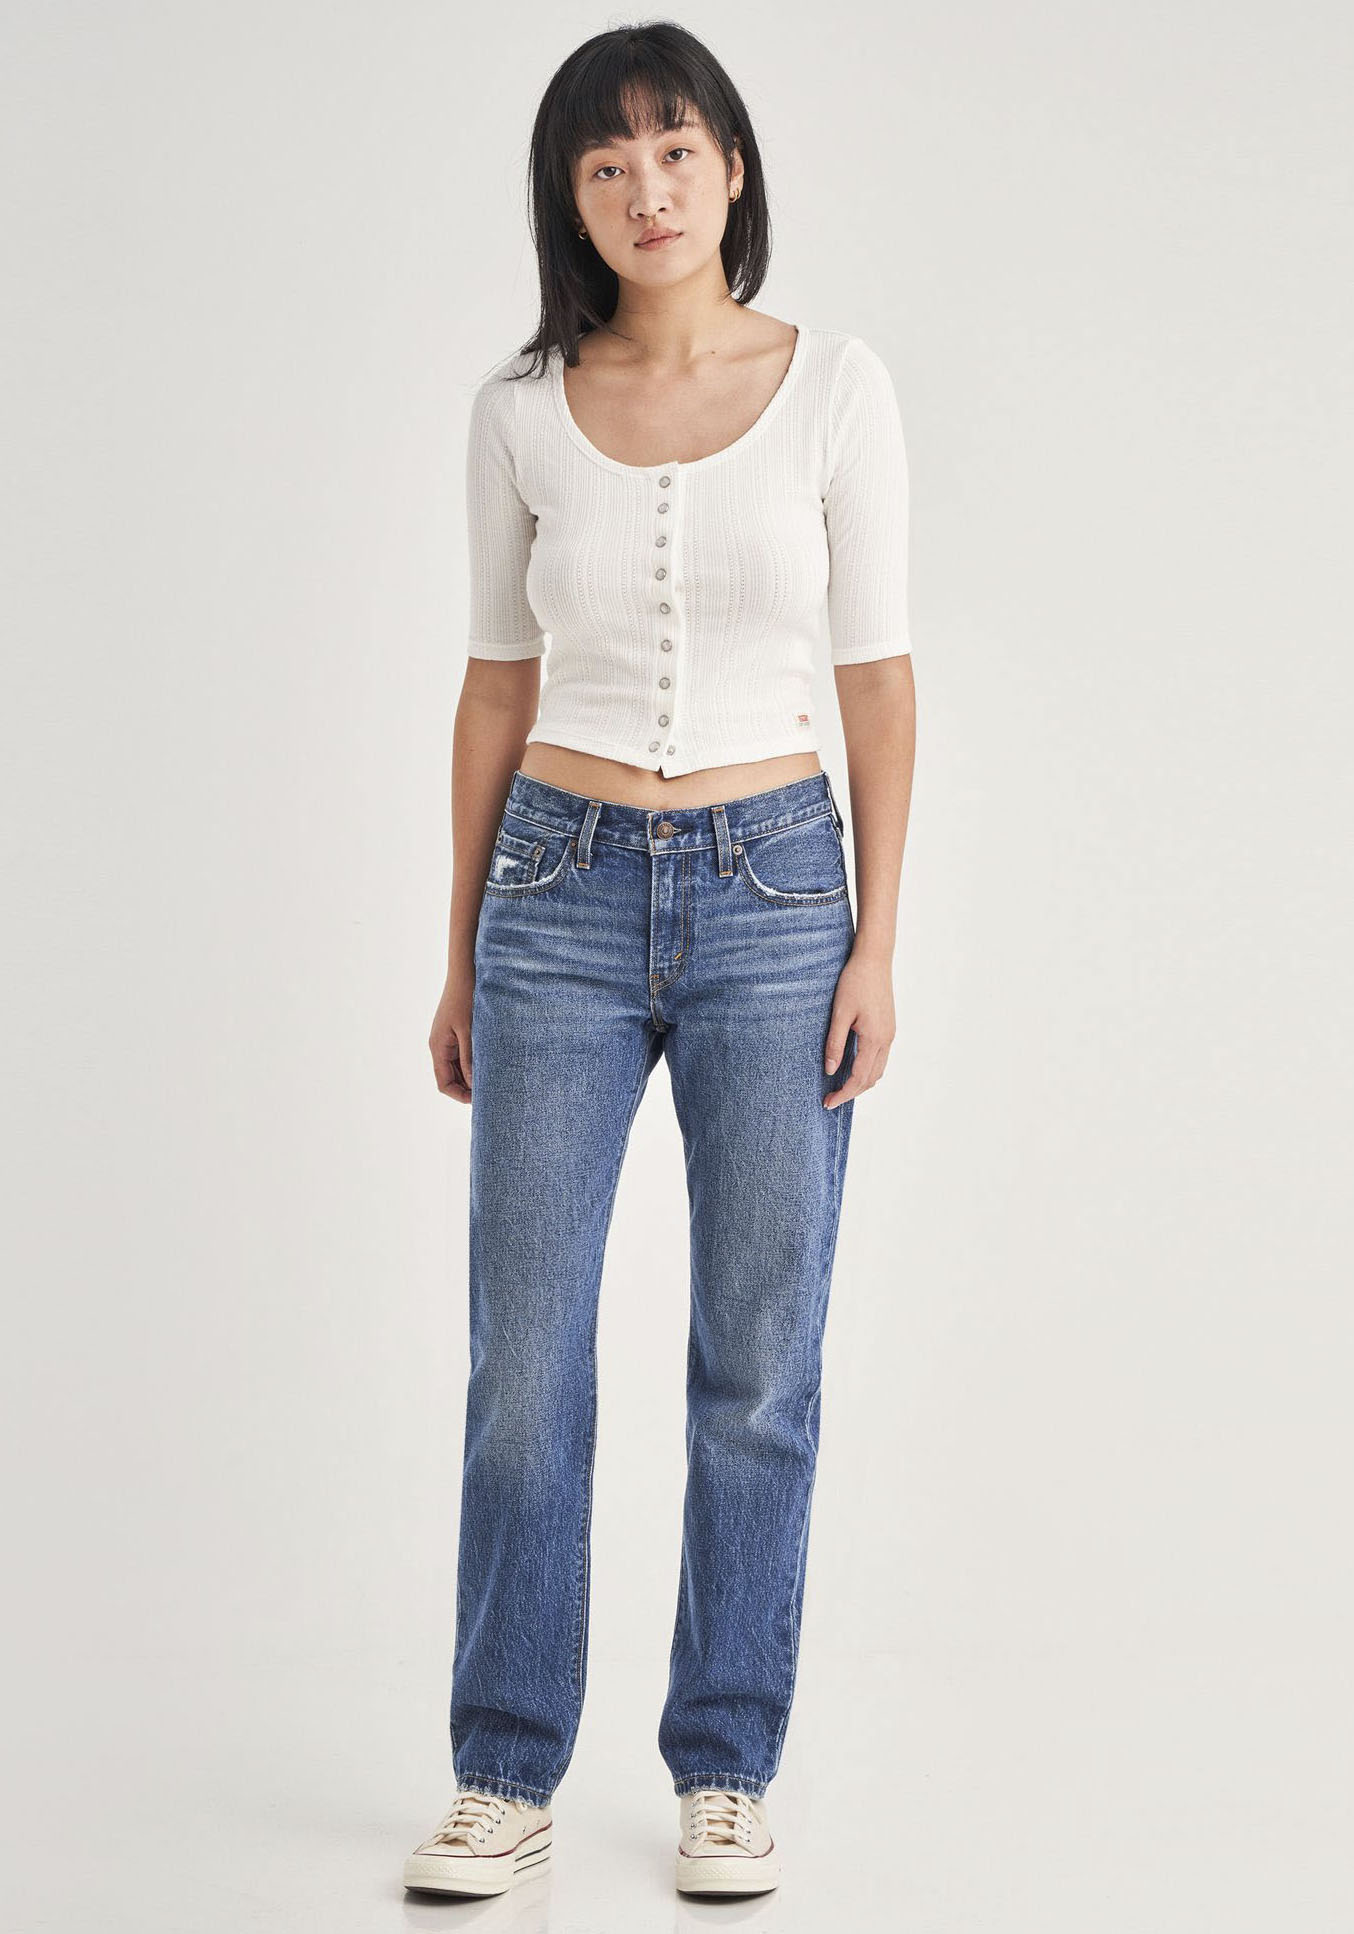 levis - Levi's Gerade Jeans "MIDDY STRAIGHT"